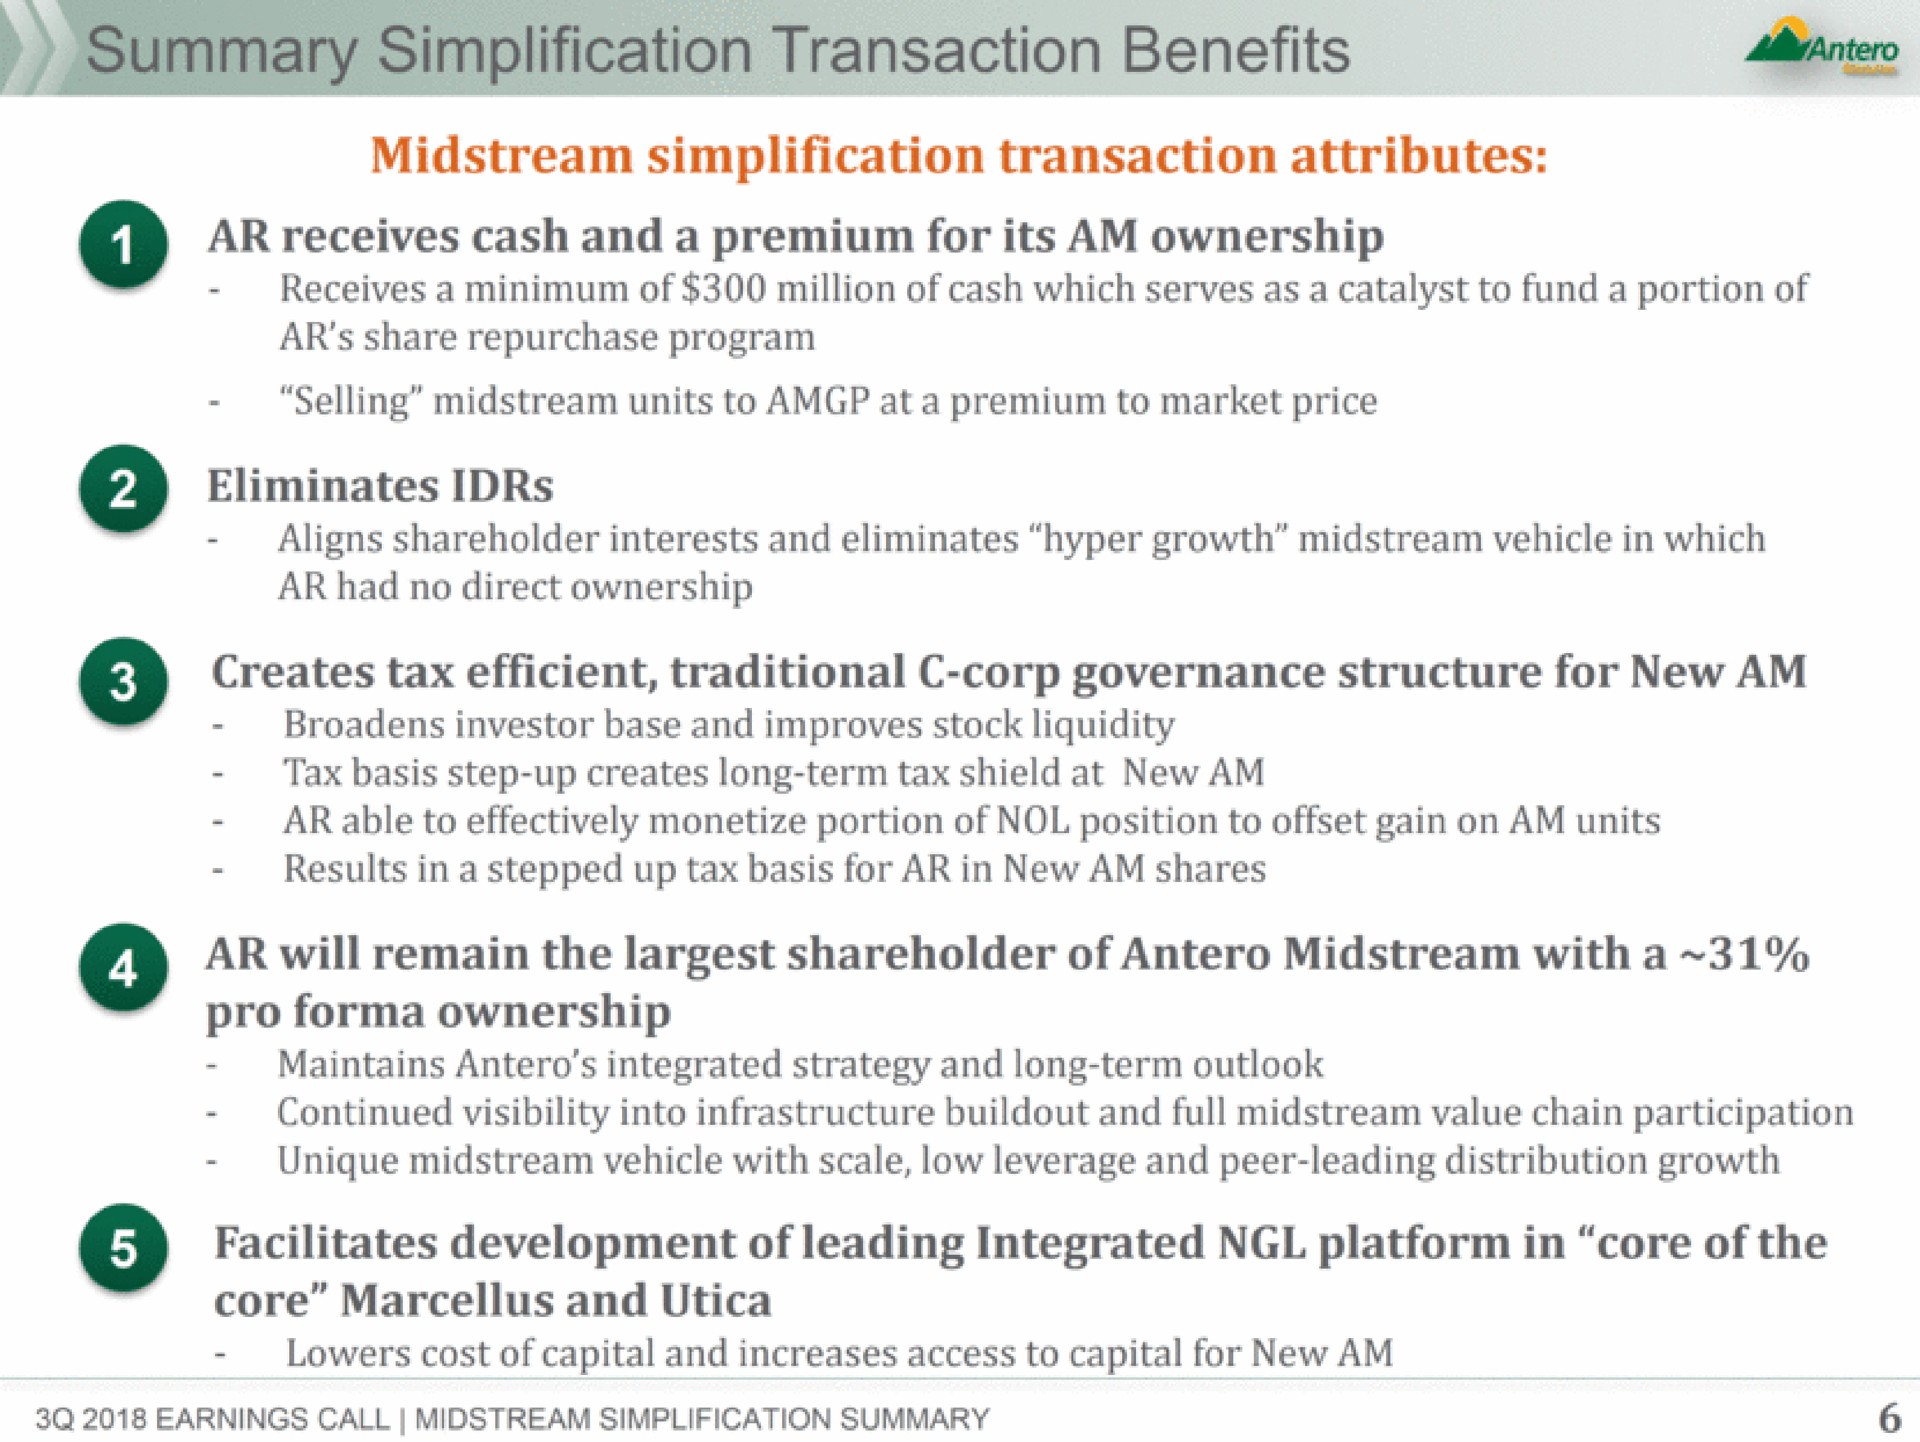 transaction benefits midstream simplification transaction attributes will remain the shareholder of midstream with a core and | Antero Midstream Partners